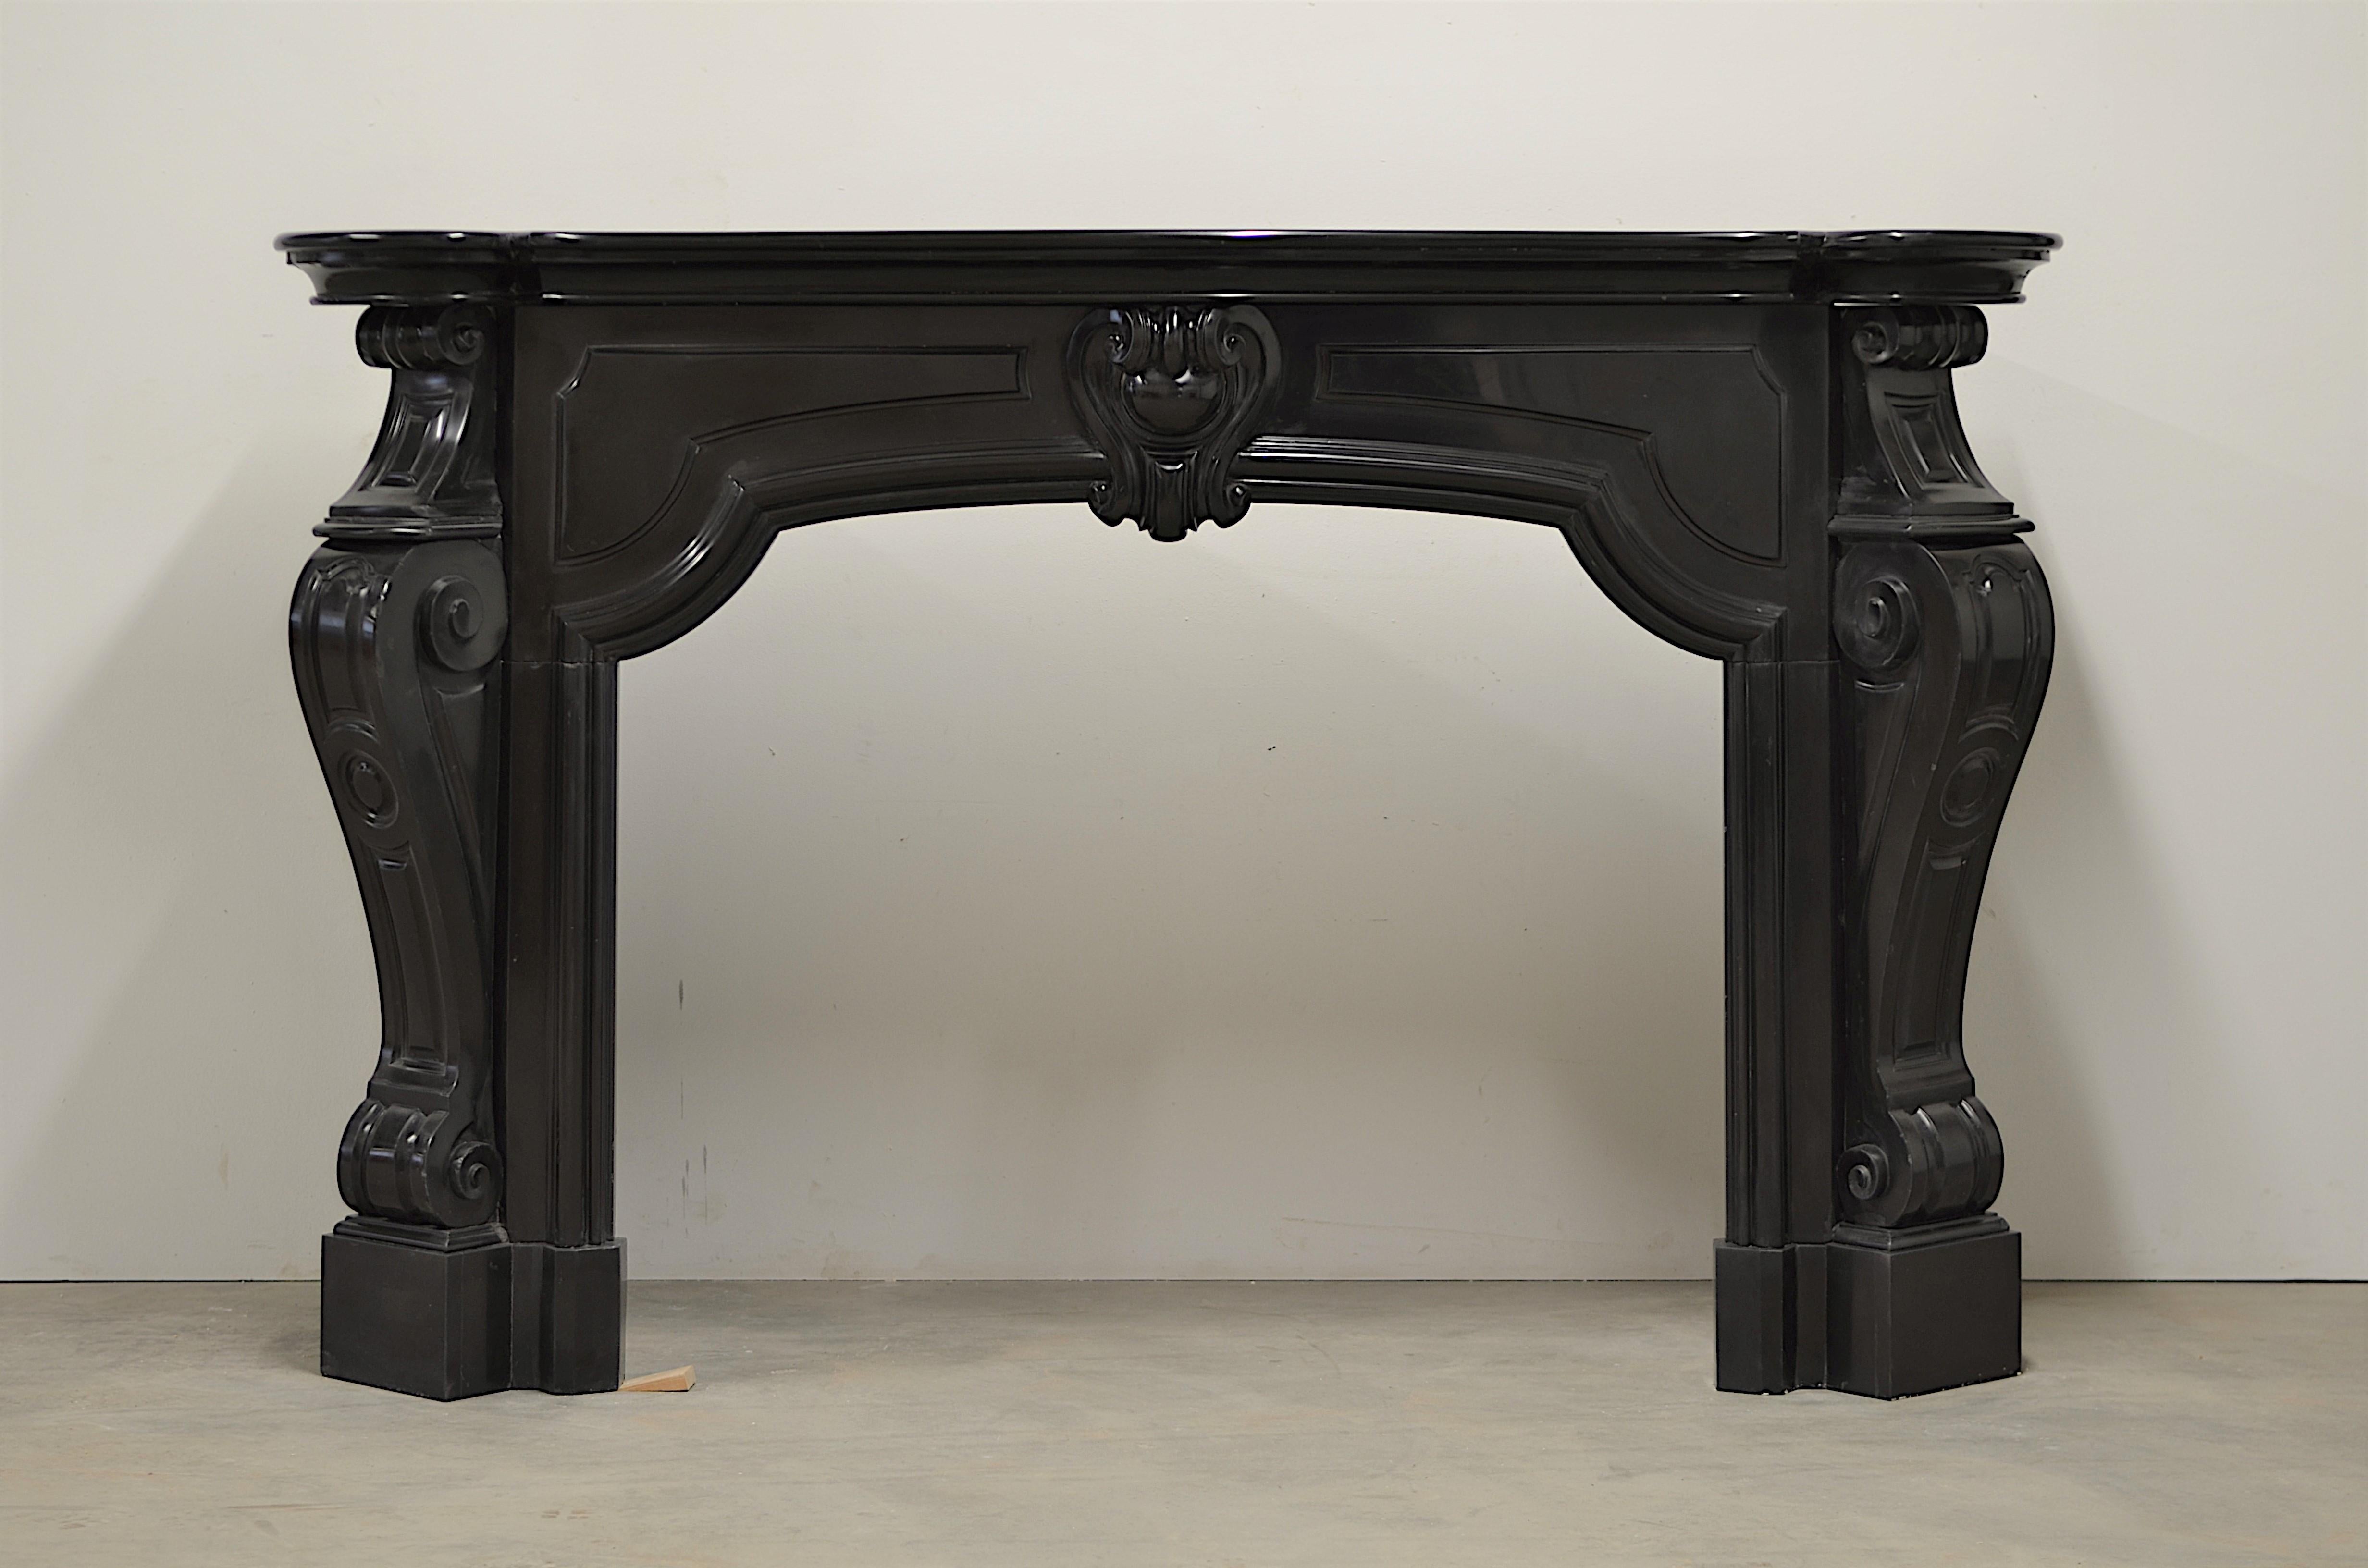 Late 19th century Dutch Louis XV fireplace executed in superb Belgian black marble.
The opulence and size of this monumental mantel are as impressive as the details and craftsmanship that went into making this.

The strong lines and powerful